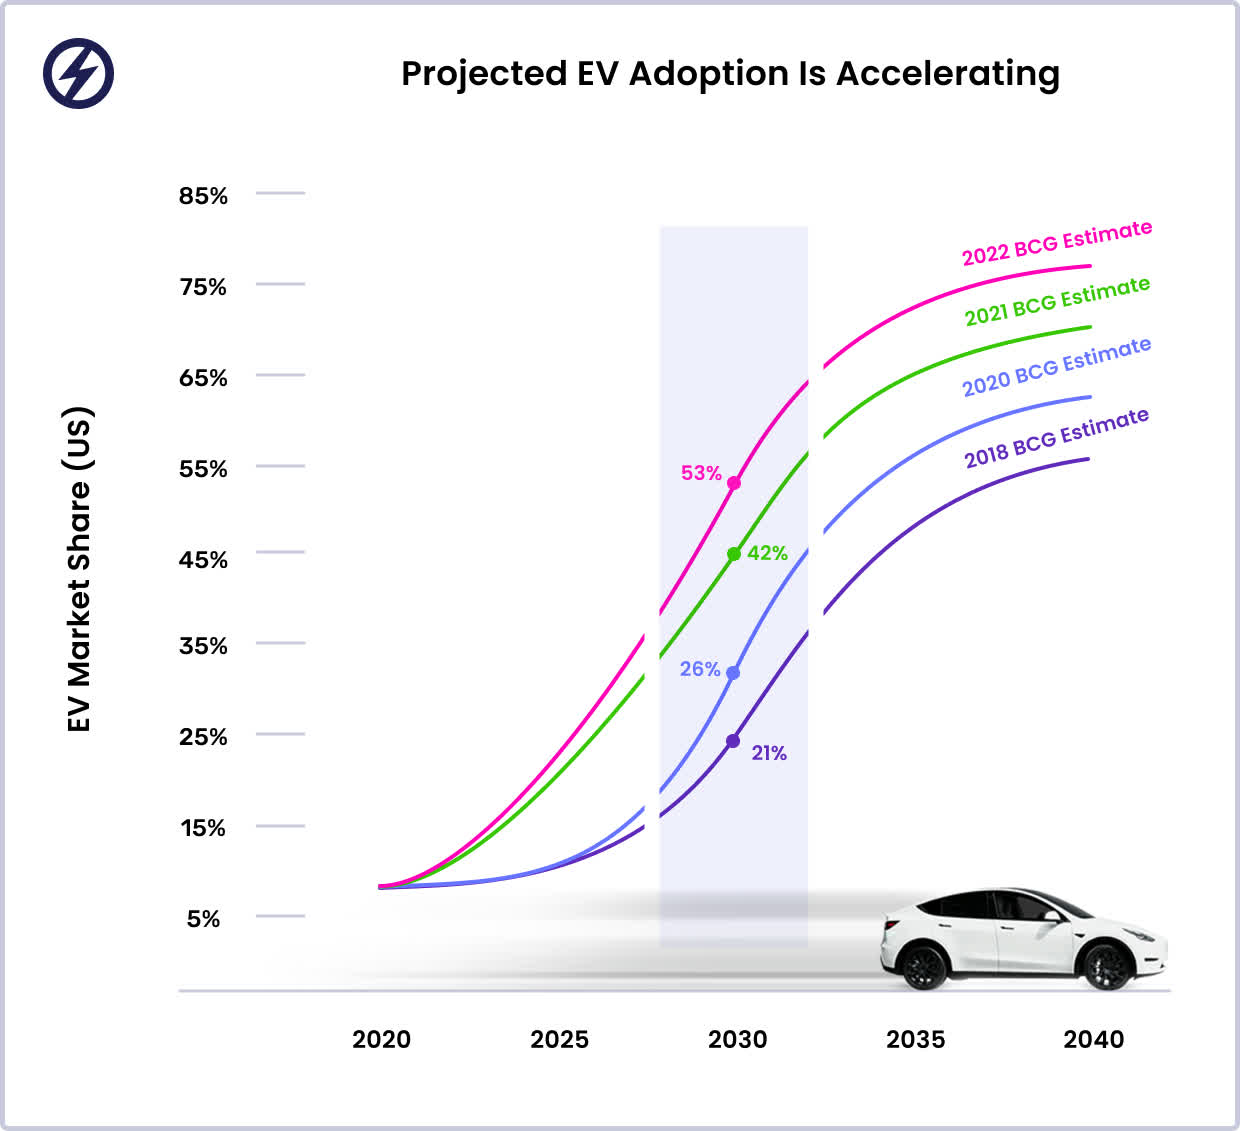 Projected EV adoption is accelerating